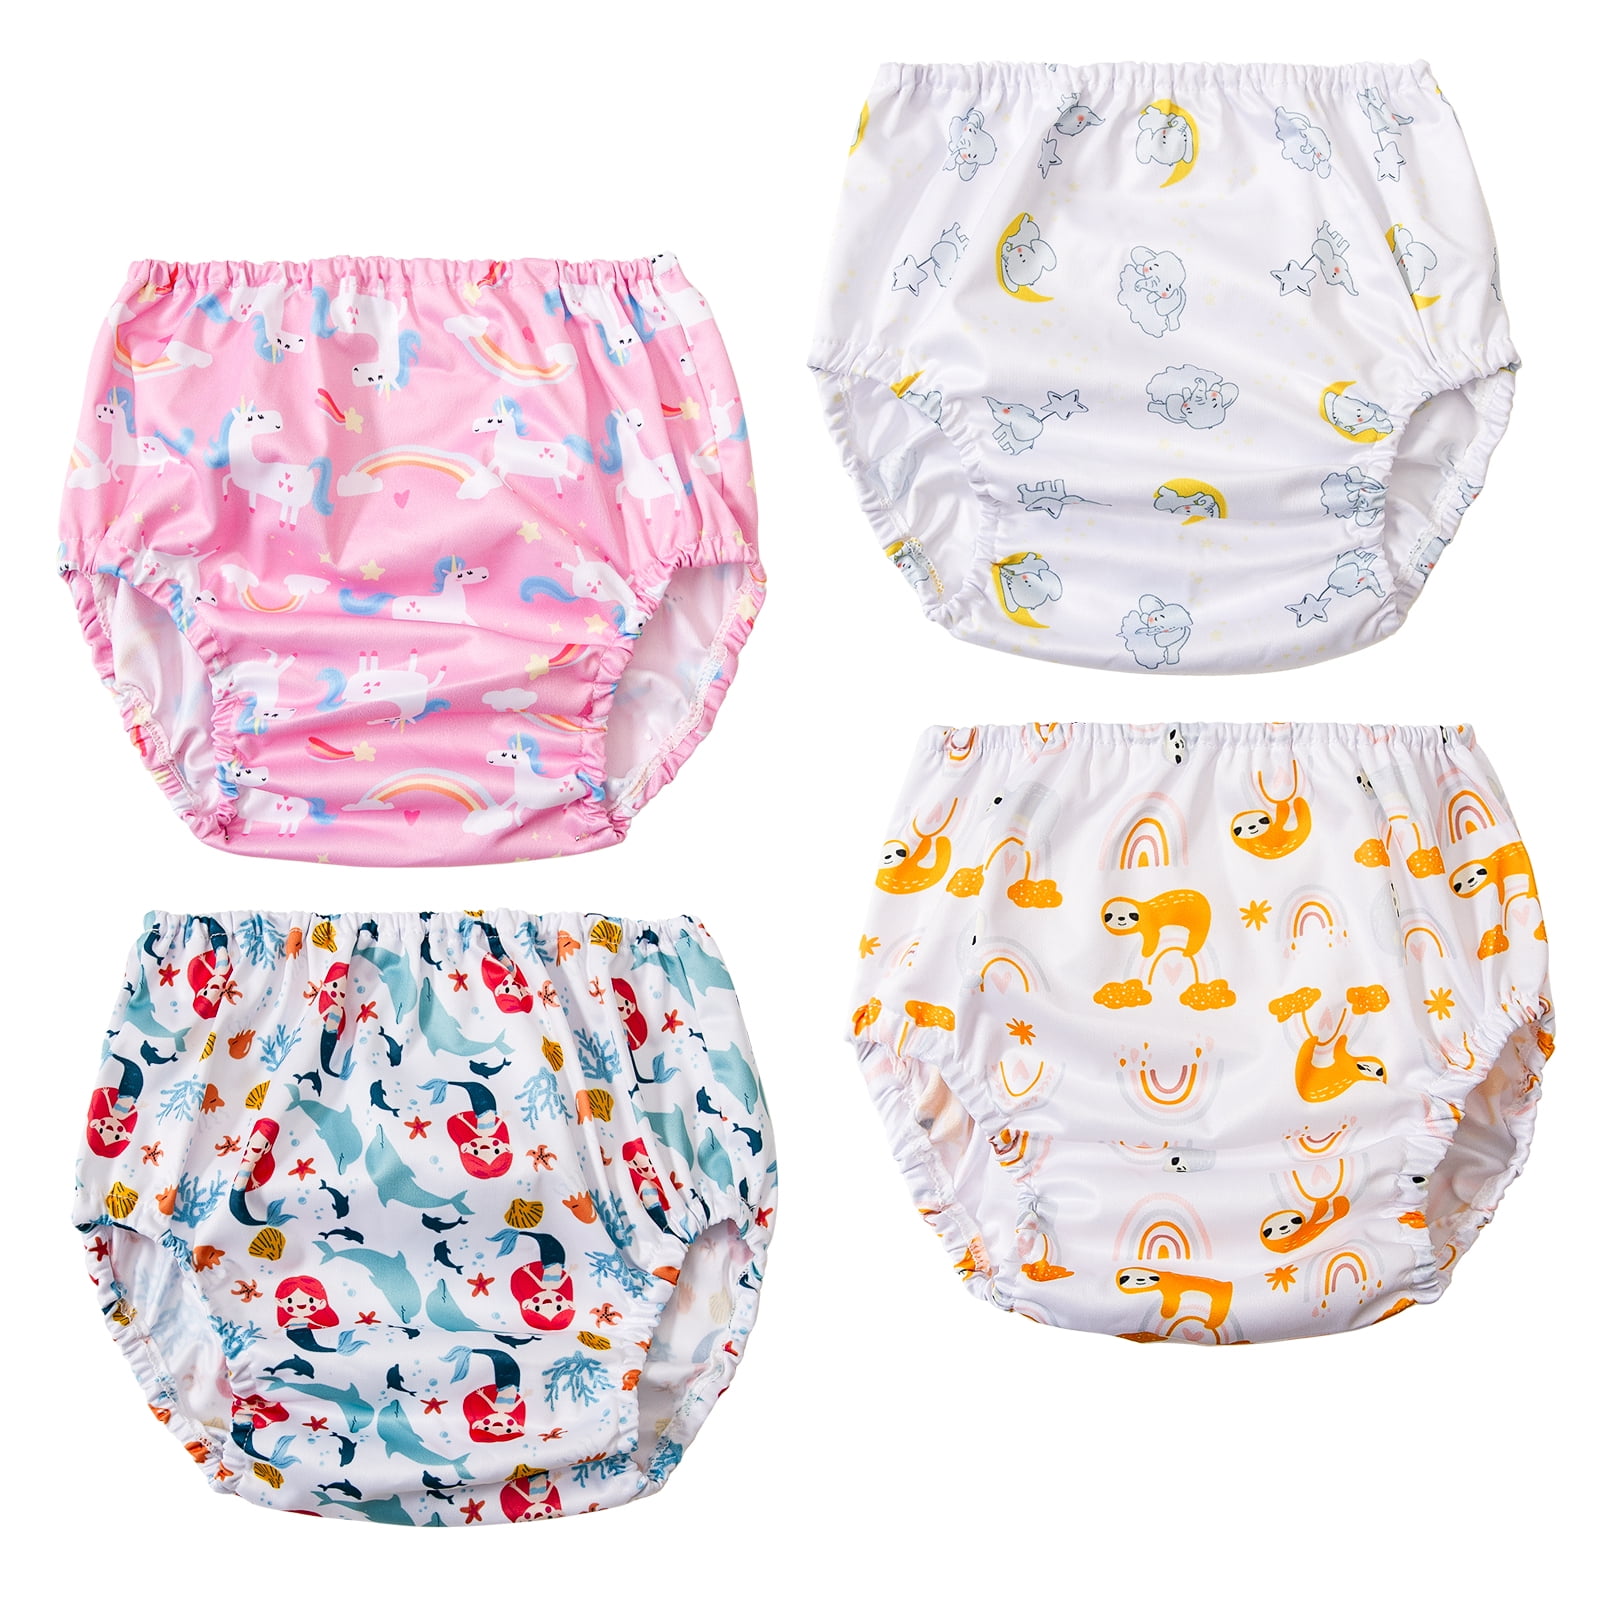 Diaper Covers for Girls Training Underwear for Girls 3T Rubber Pants for  Toddlers Diaper Cover for Swimming Plastic Diaper Covers Toddler Plastic Pants  Rubber Pants for Babies 